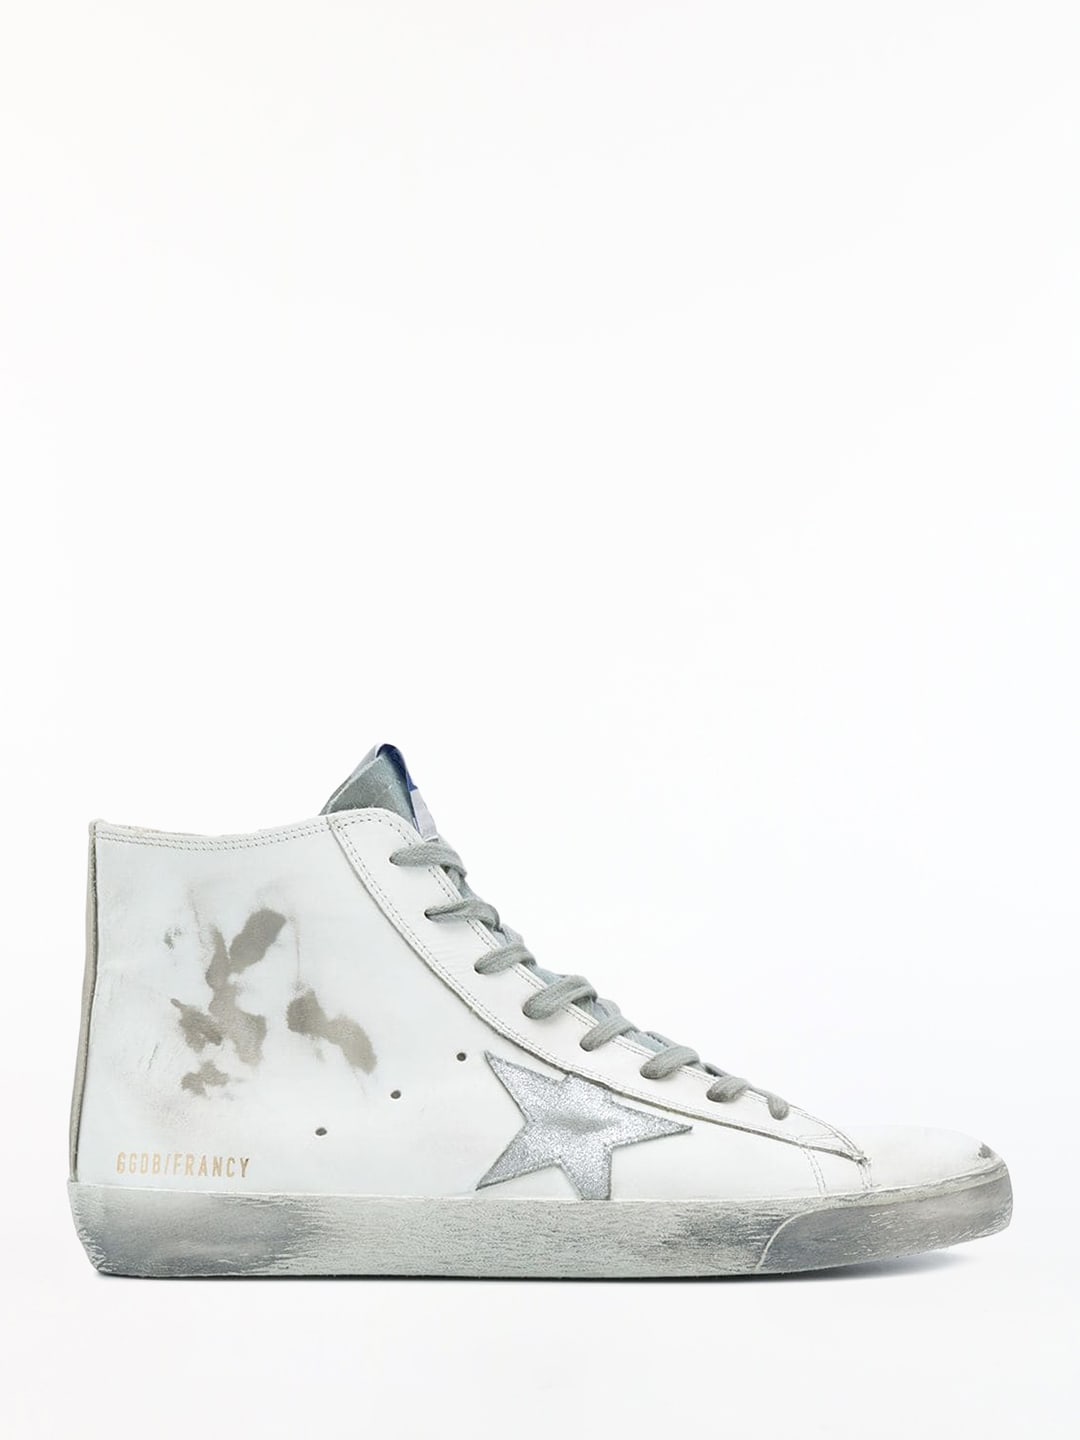 Golden Goose Francy Sneakers With Silver Star